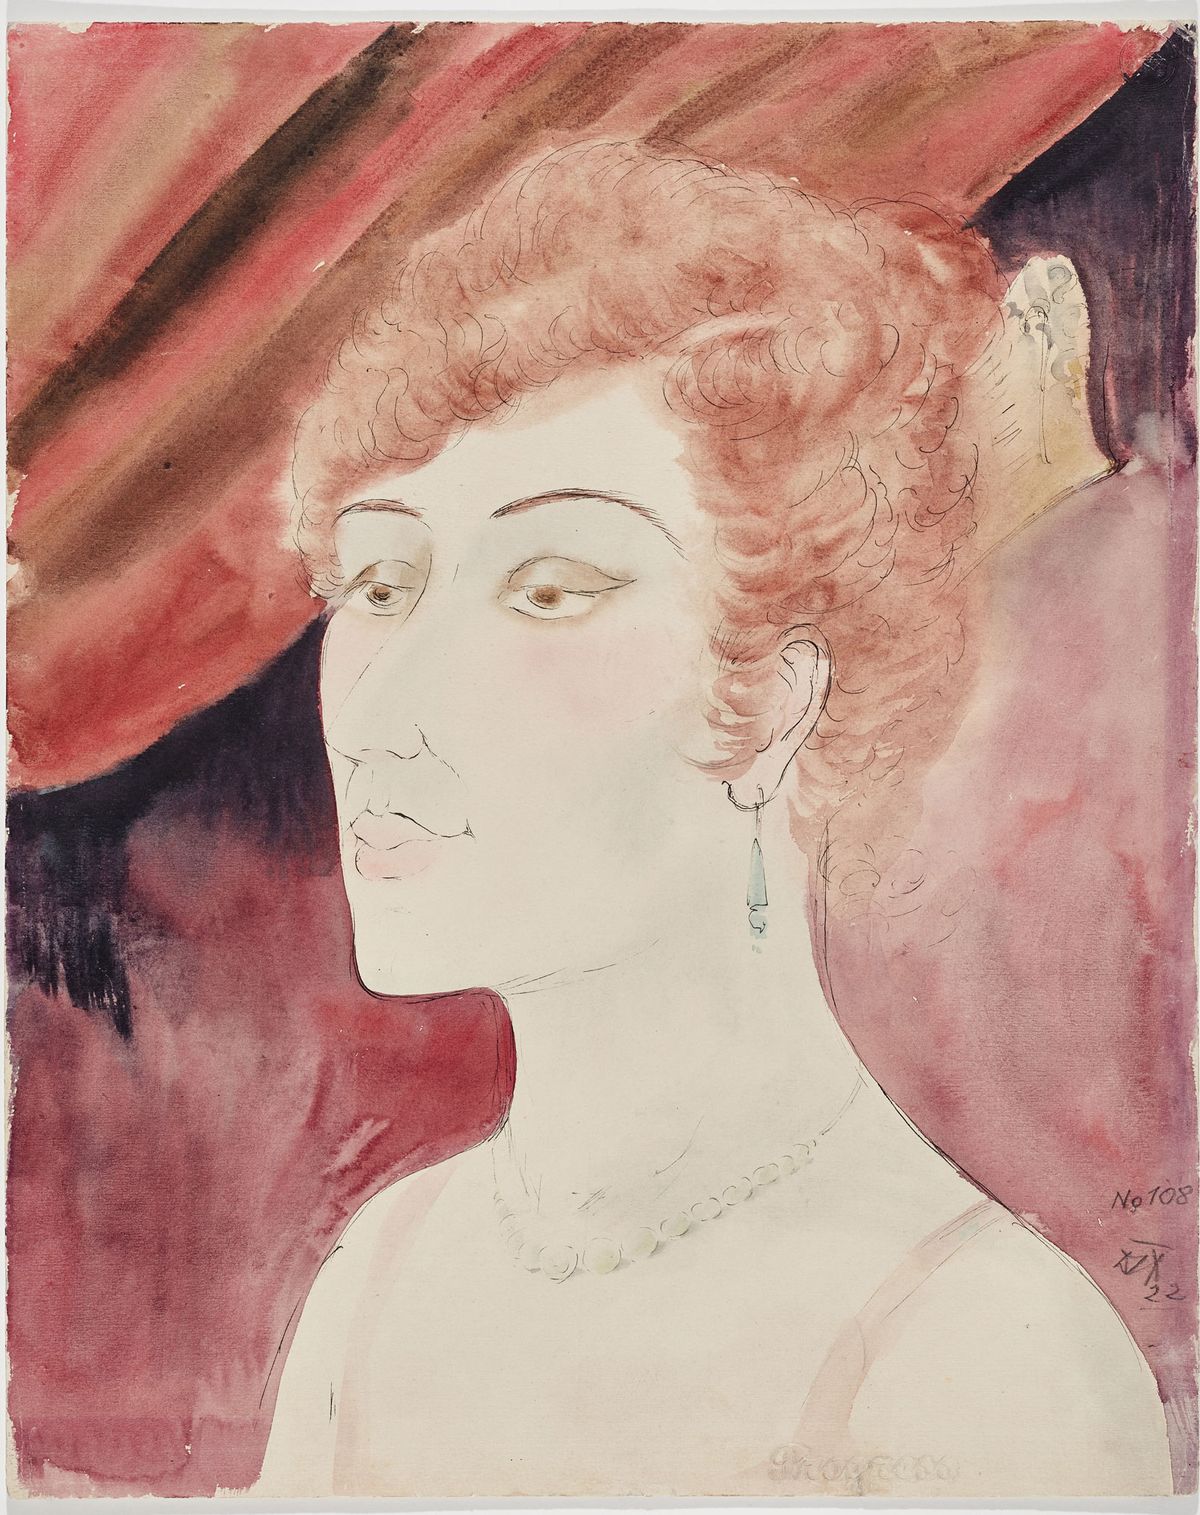 The watercolour Dame in der Loge (1922) by Otto Dix is one of two works in the Gurlitt bequest that will be jointly transferred to the rightful owners